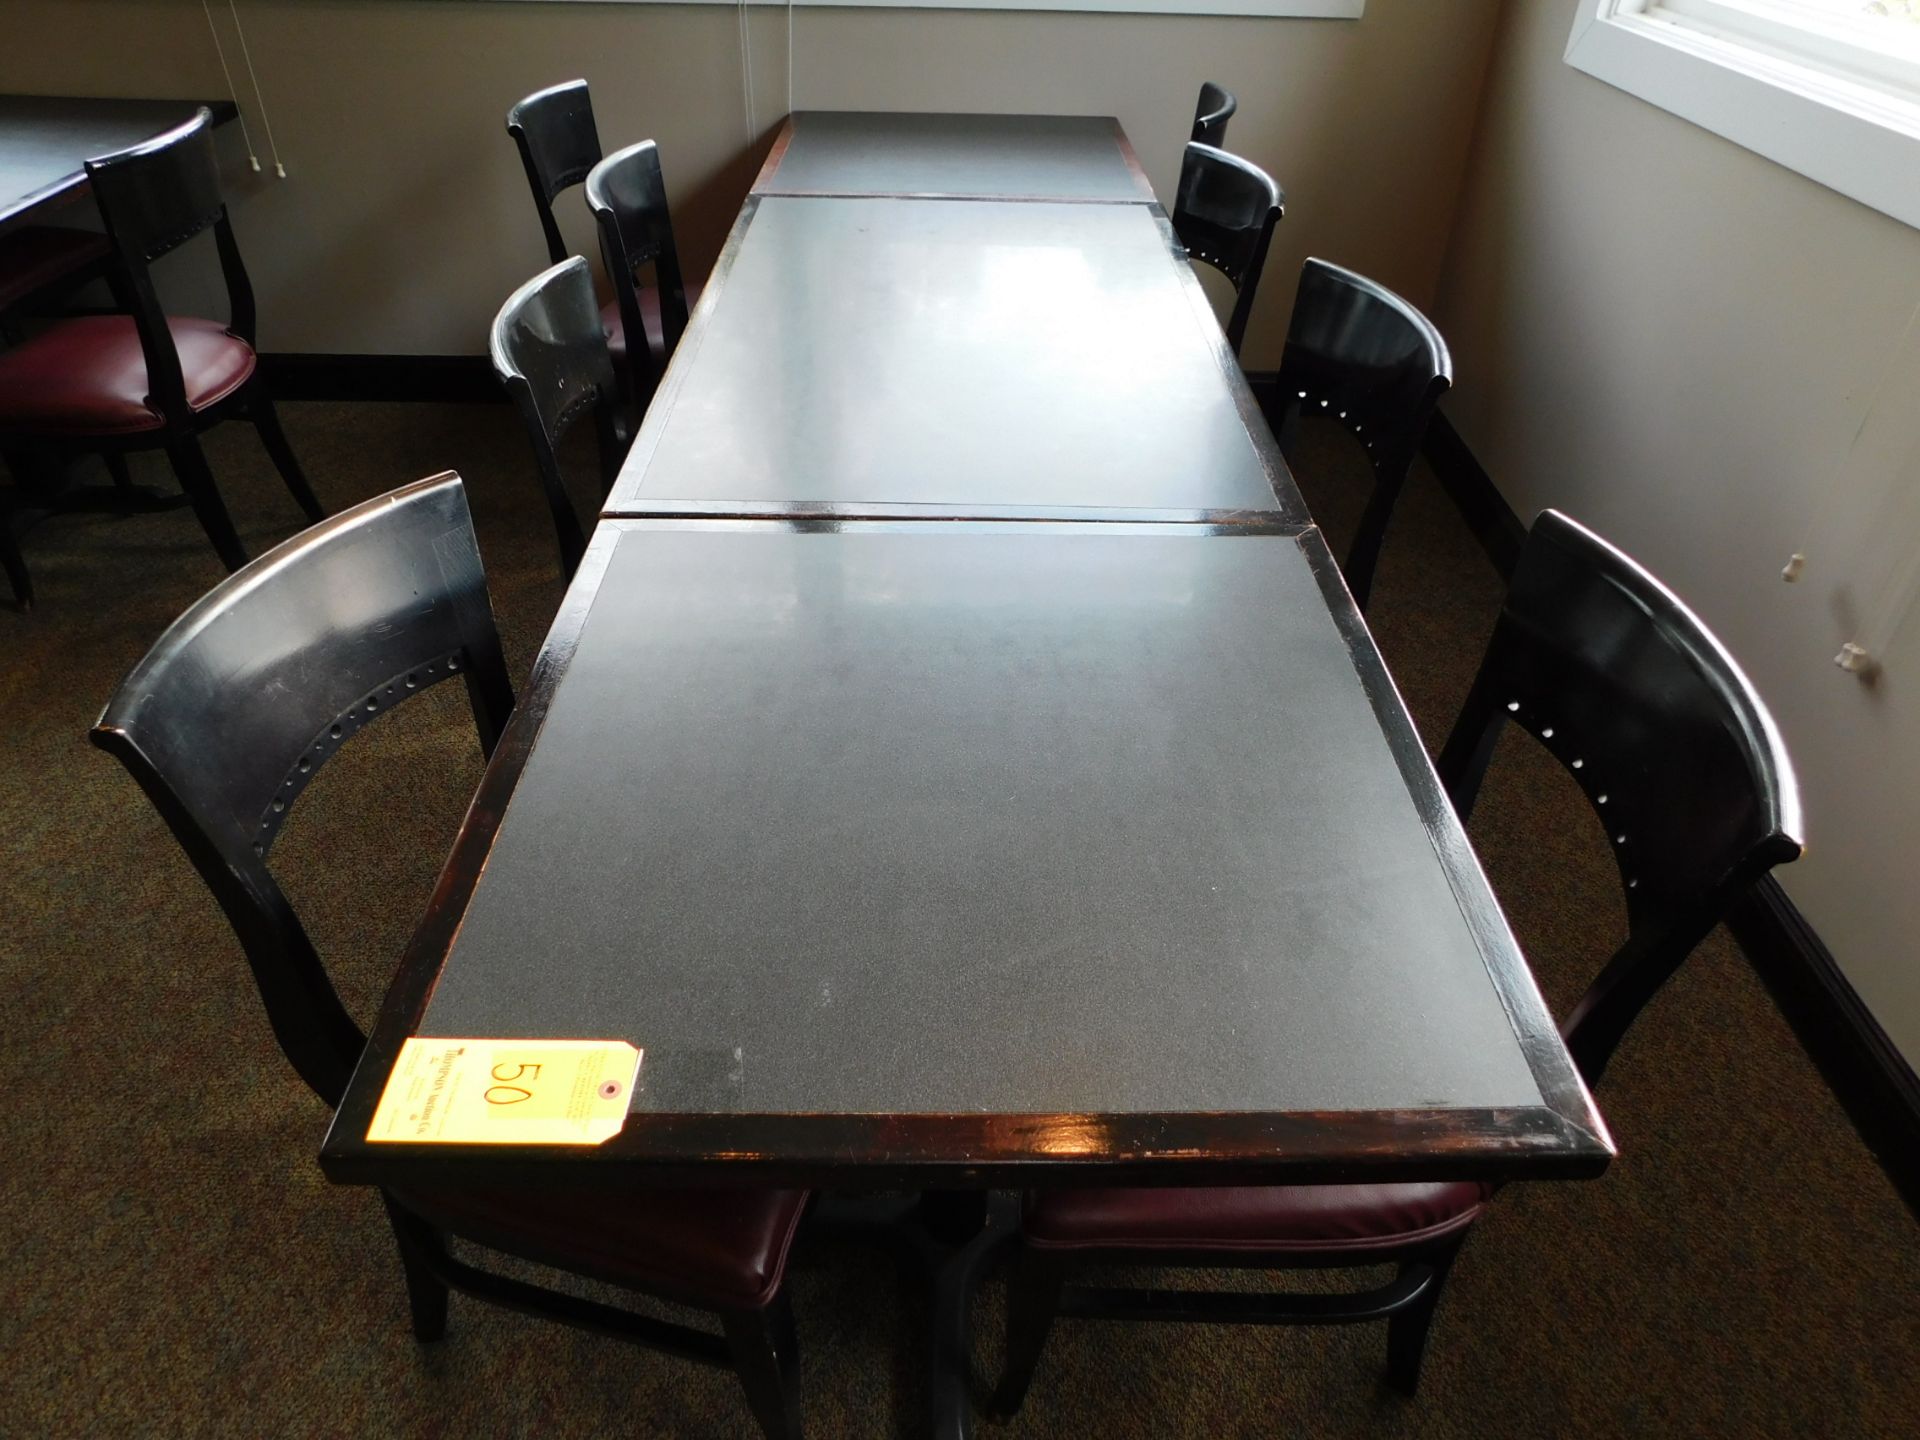 1 Wood Table 4' L x 30"W, 2 Wood Tables 30"L x 30"W, with 7 Chairs